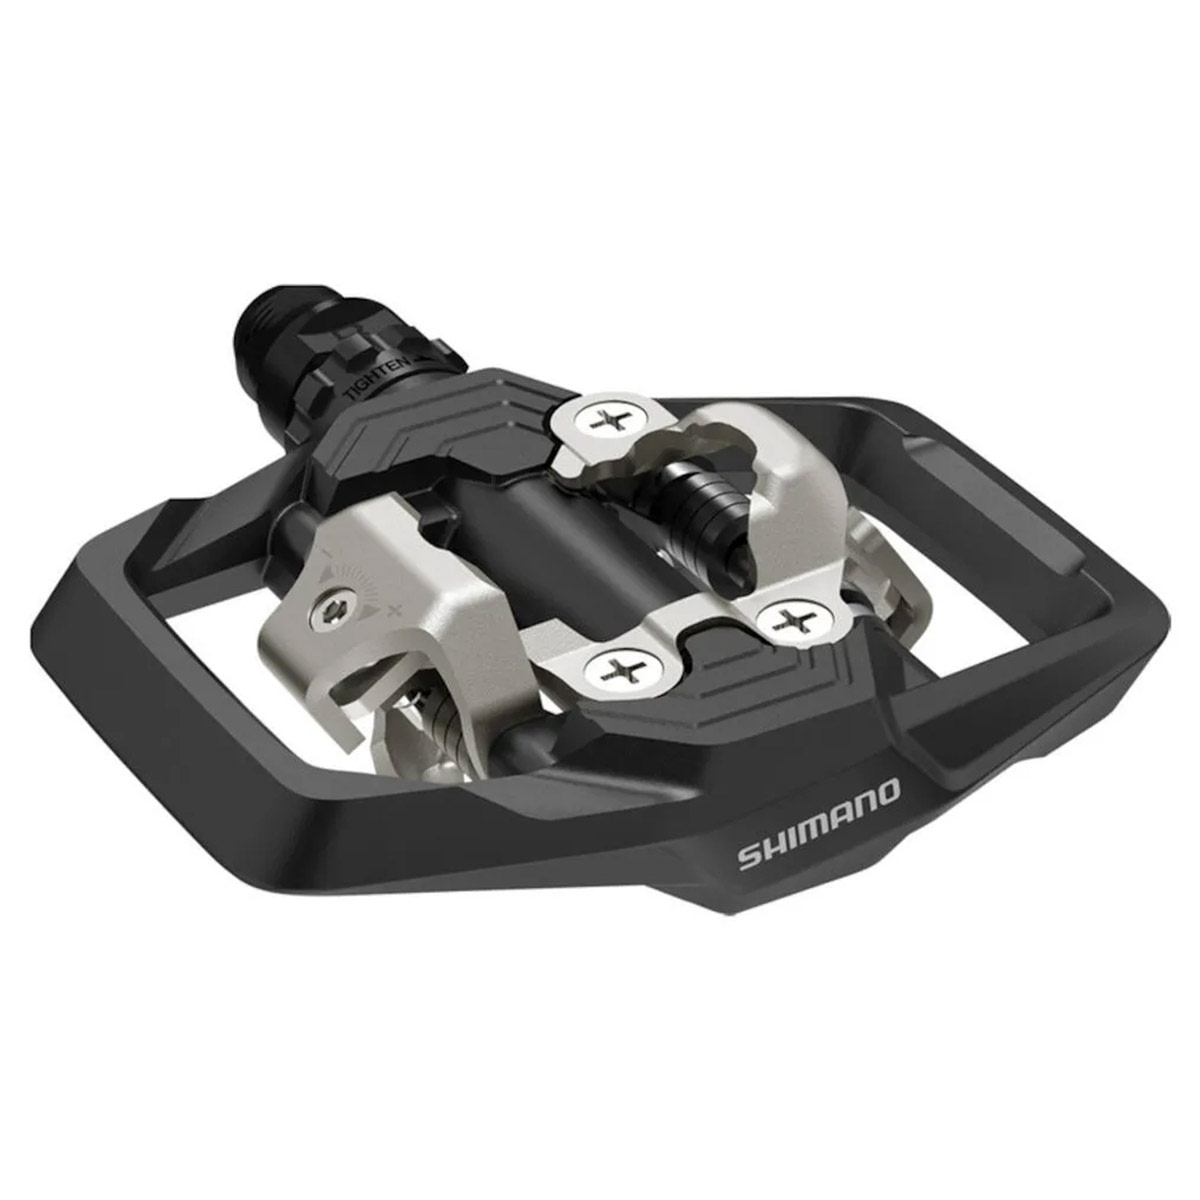 PEDALES SHIMANO PD-ME700